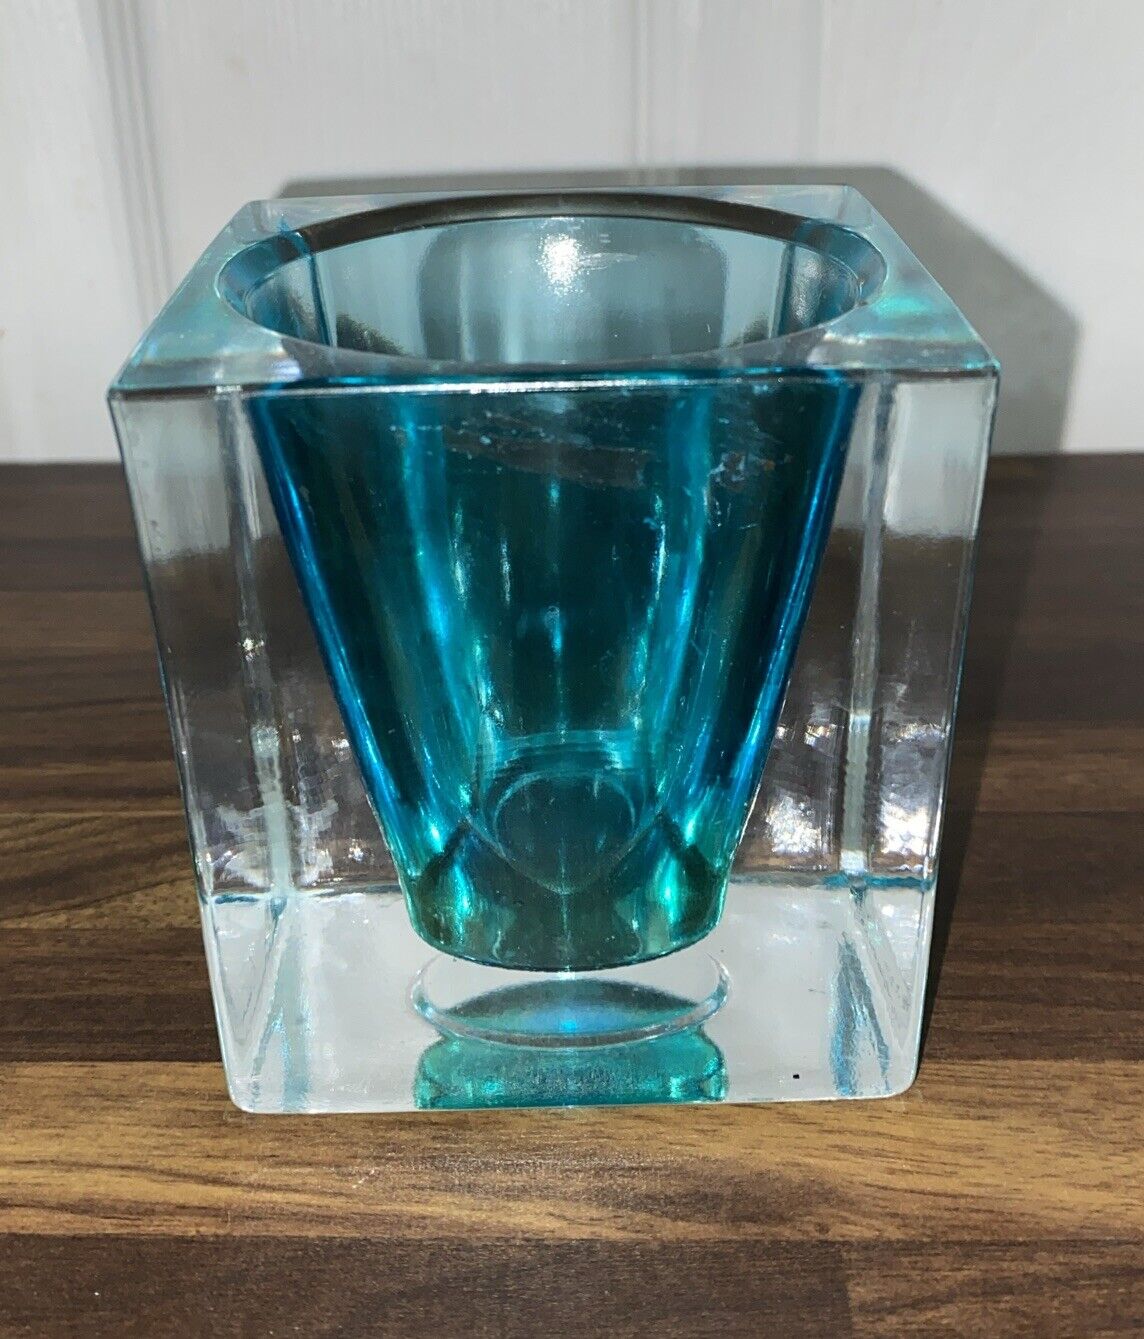 Vetreria Lux Italy Heavy Glass Votive Candle Holder Blue w/ Green hues 3.5 in